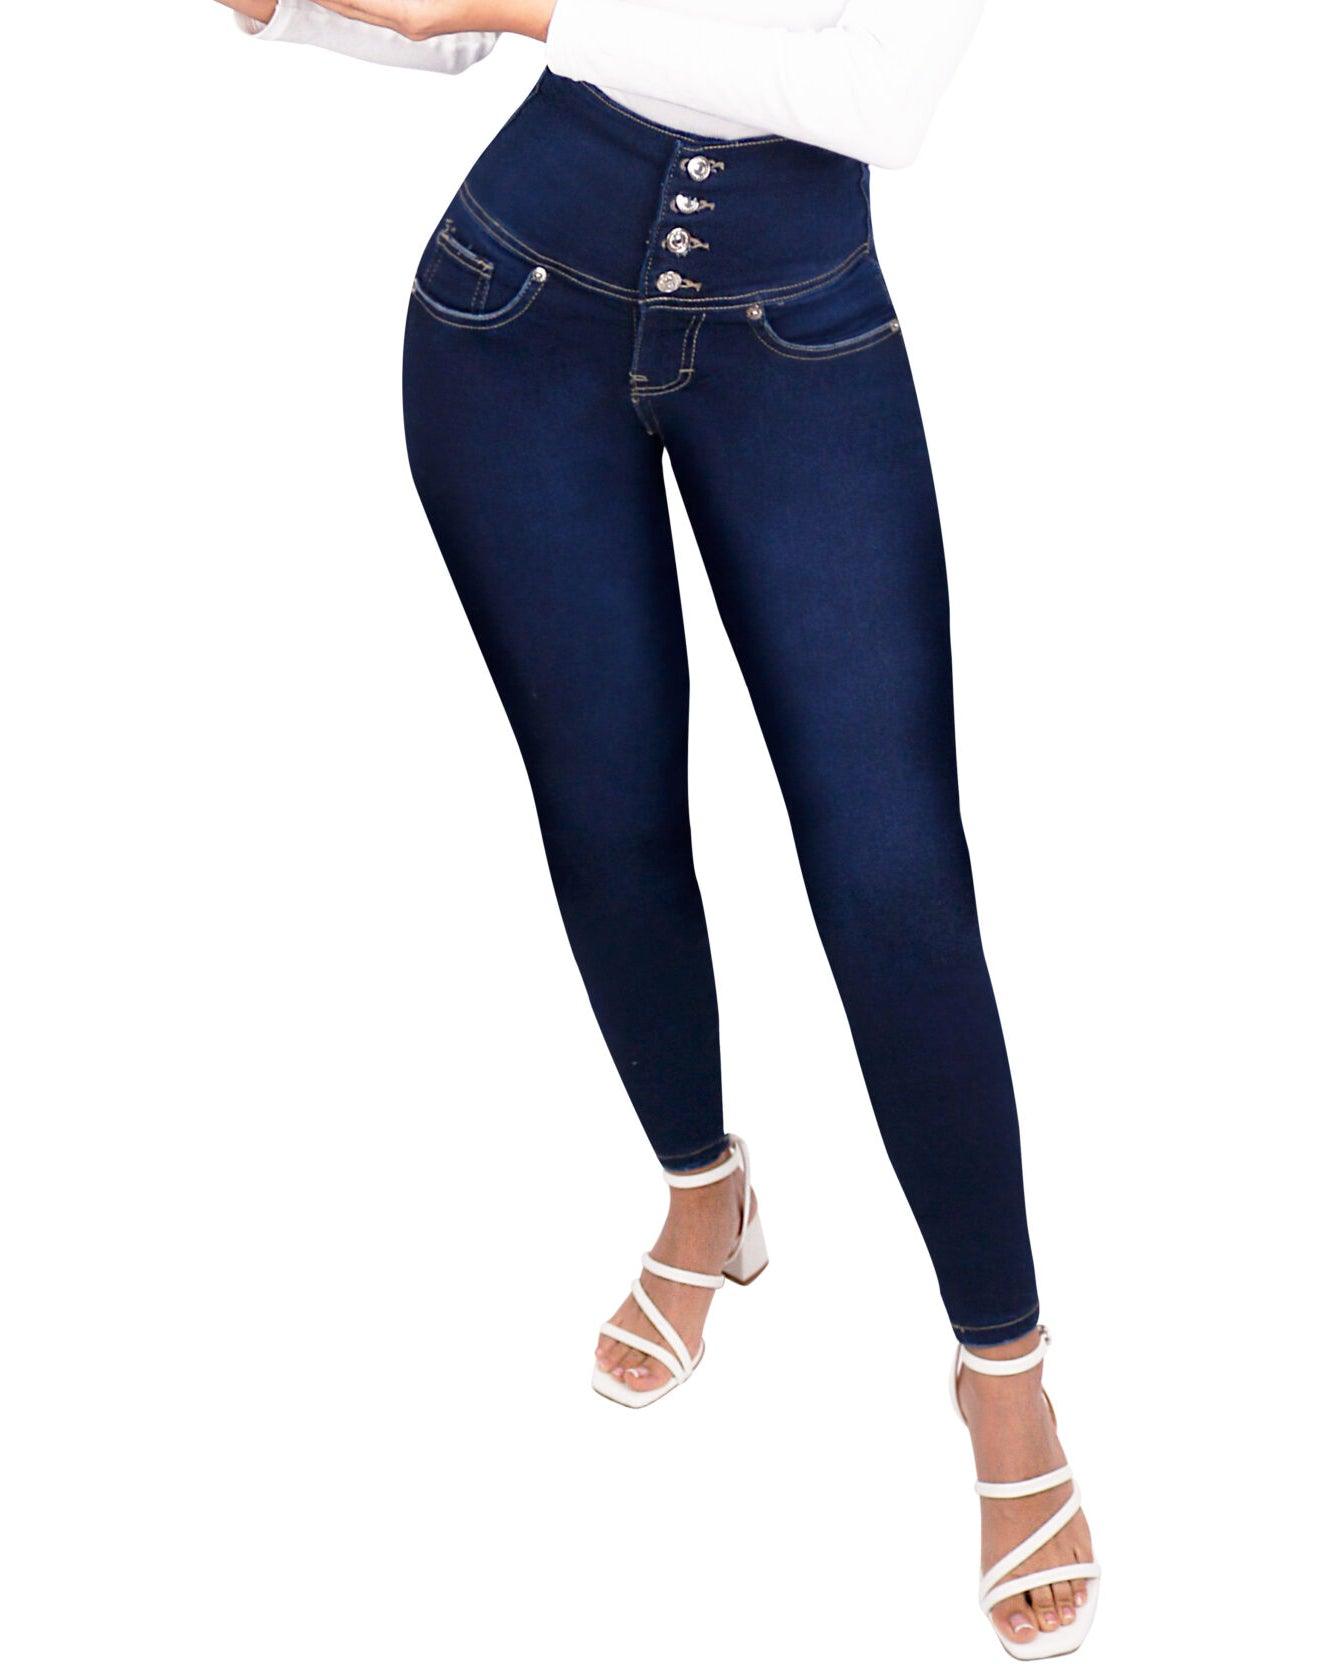 Wishe Butt Lifting Curvy Jeans High Waist Stretchy Jeans